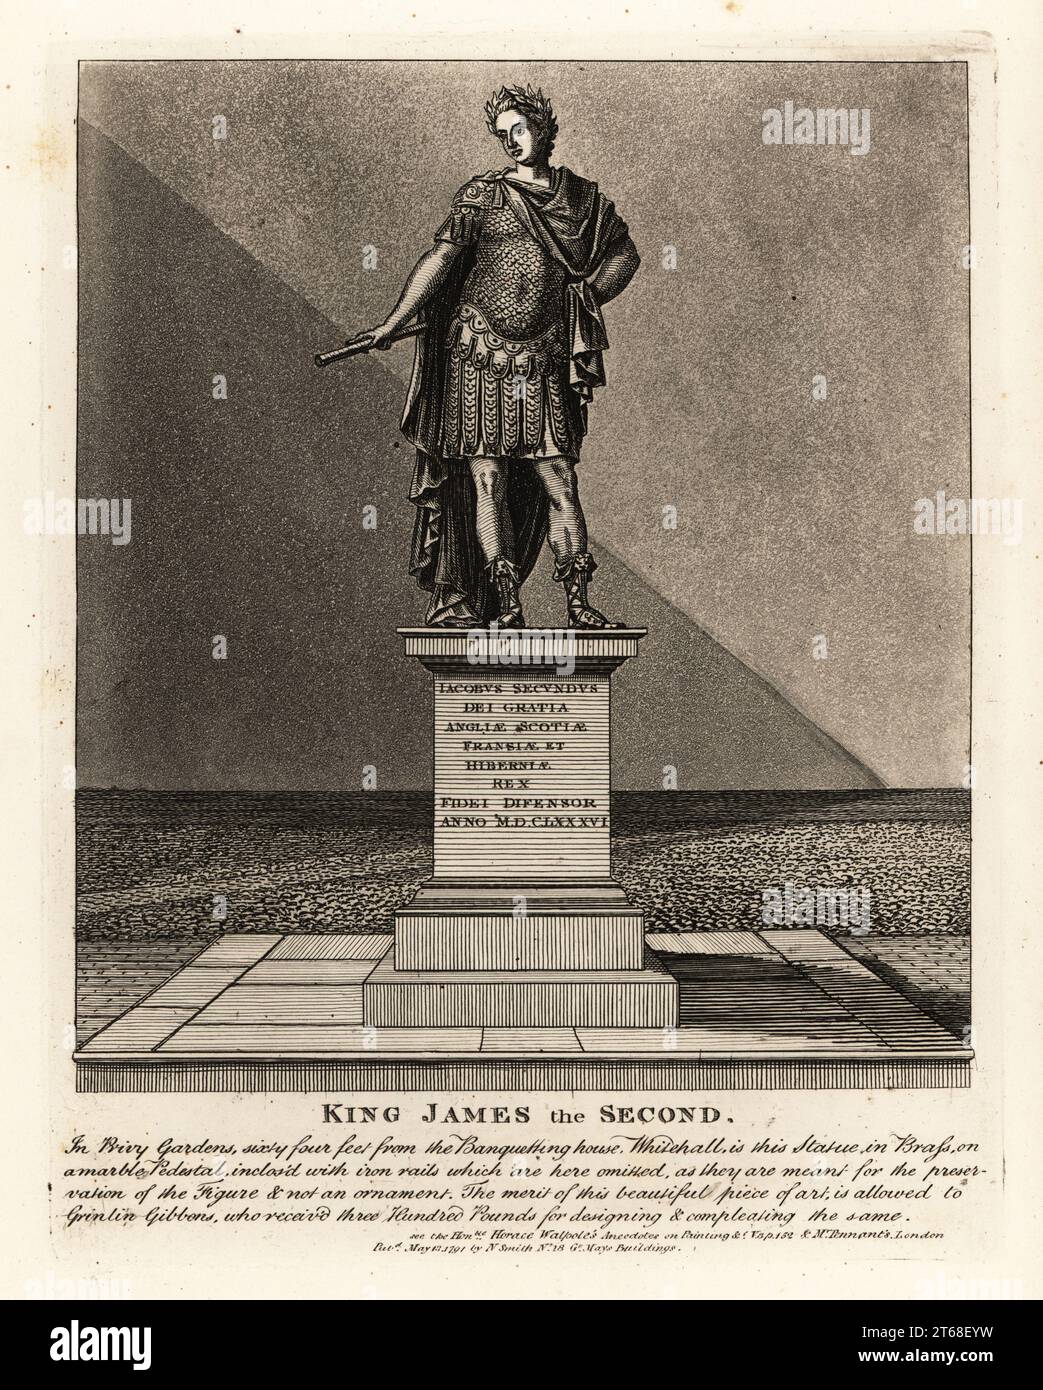 Statue of King James II of England in costume as a Roman emperor, Jacobus Seundus, designed by Grinlin Gibbons, in the Privy Gardens. Copperplate engraving by John Thomas Smith after original drawings by members of the Society of Antiquaries from his J.T. Smiths Antiquities of London and its Environs, J. Sewell, R. Folder, J. Simco, London, 1791. Stock Photo